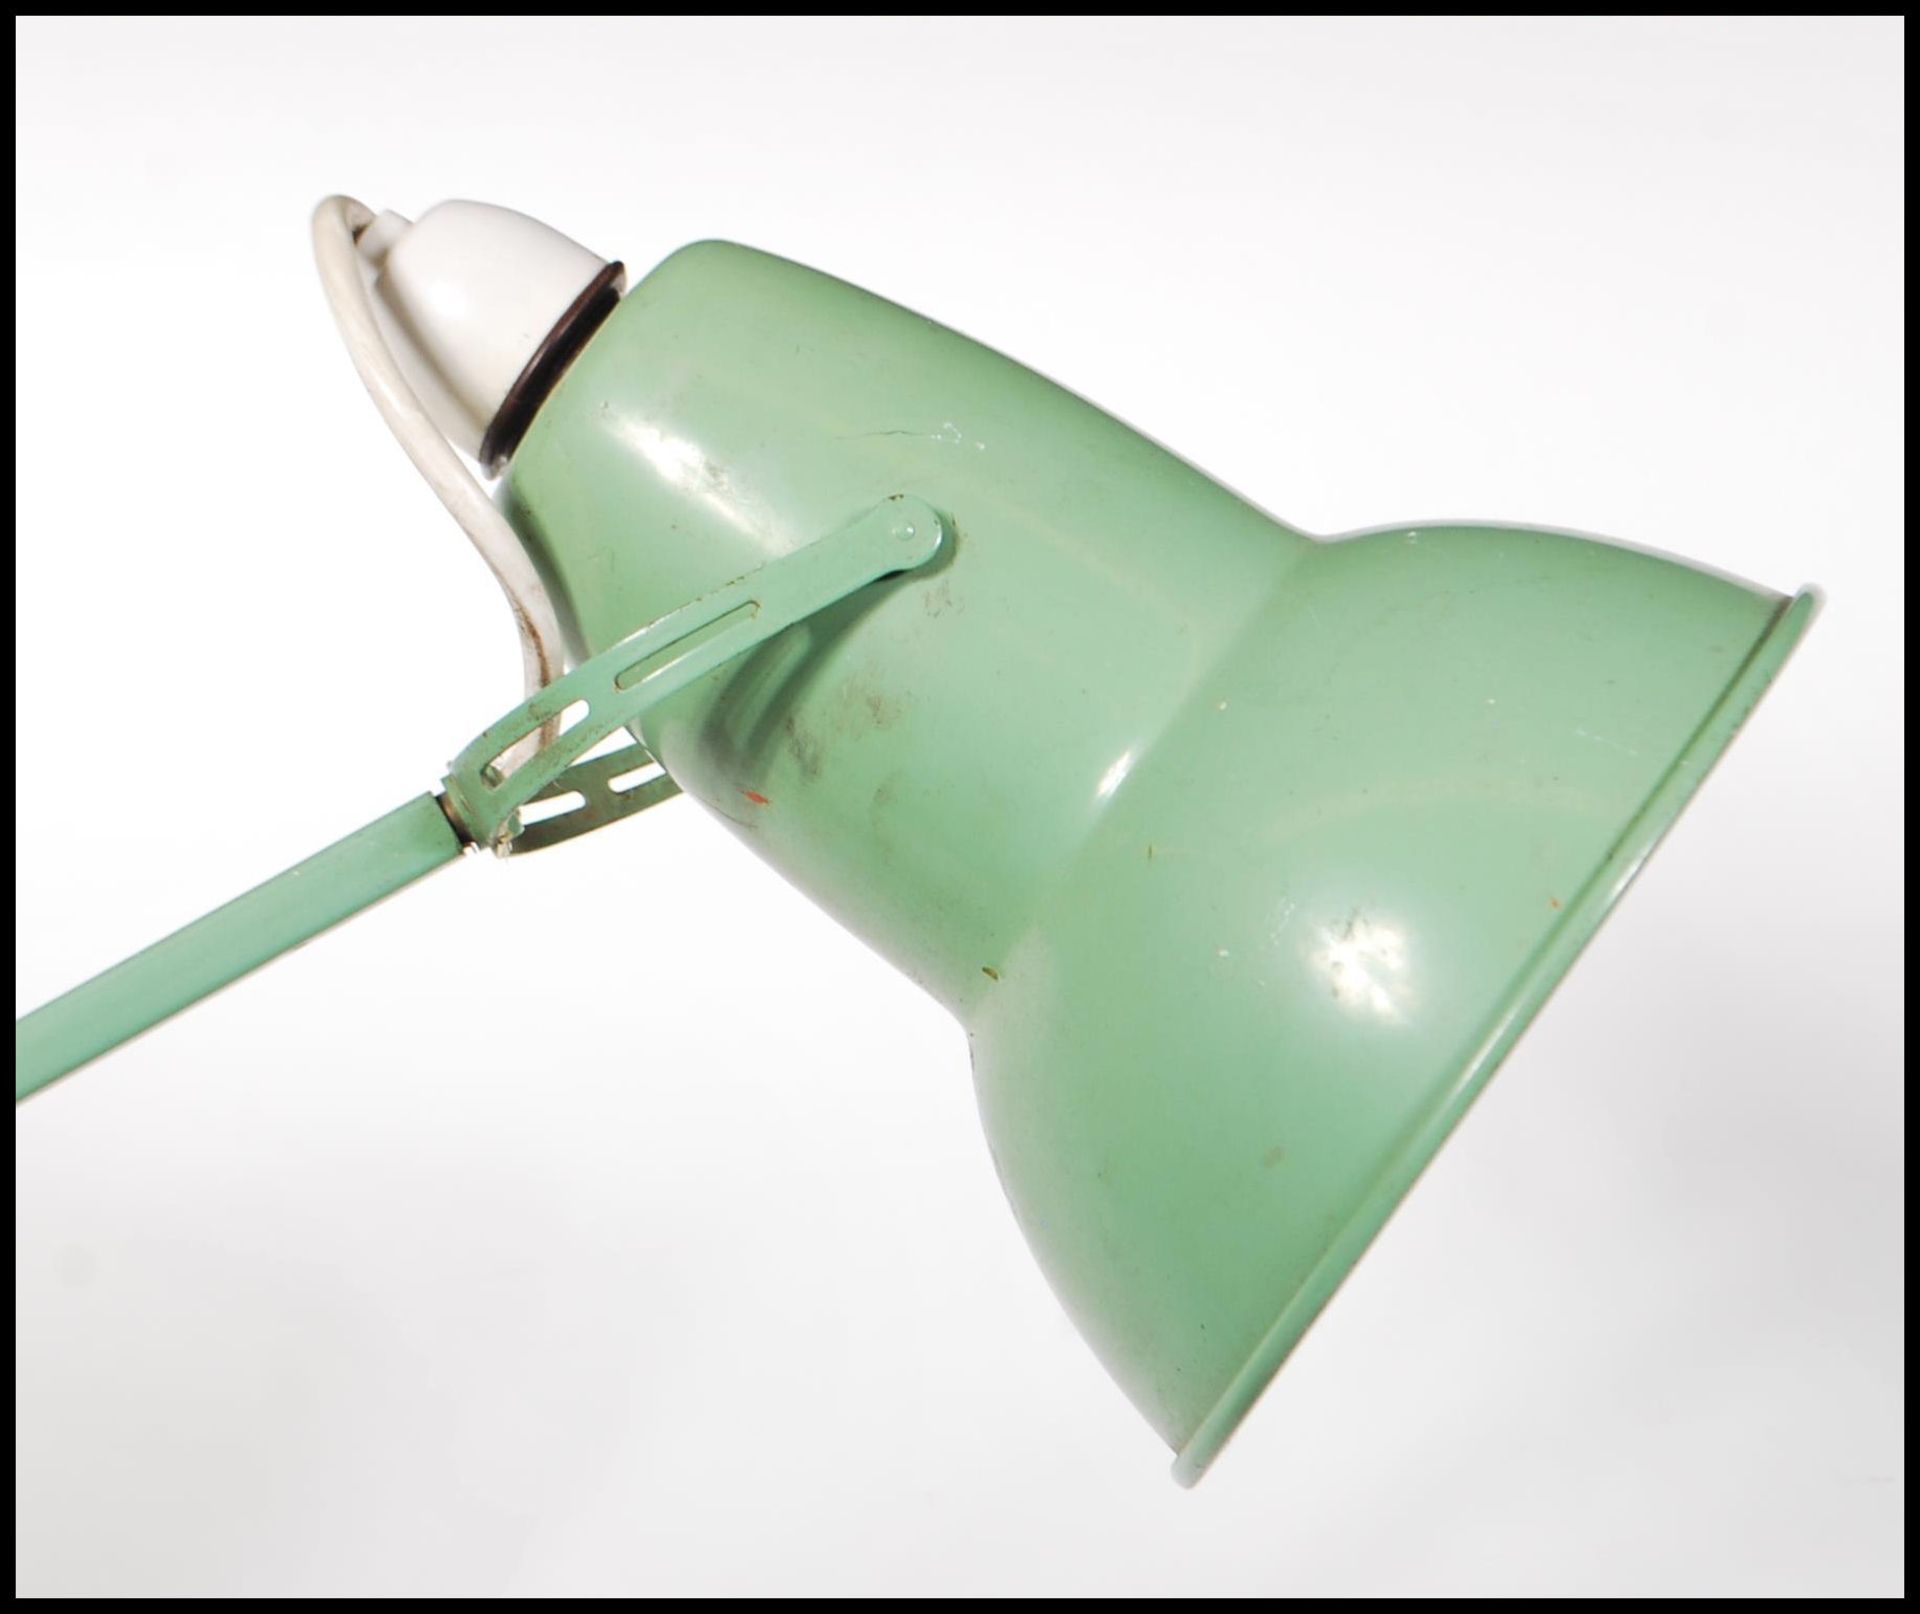 A vintage early 20th century retro industrial two step Herbert Terry angle poise lamp light in a - Image 4 of 4